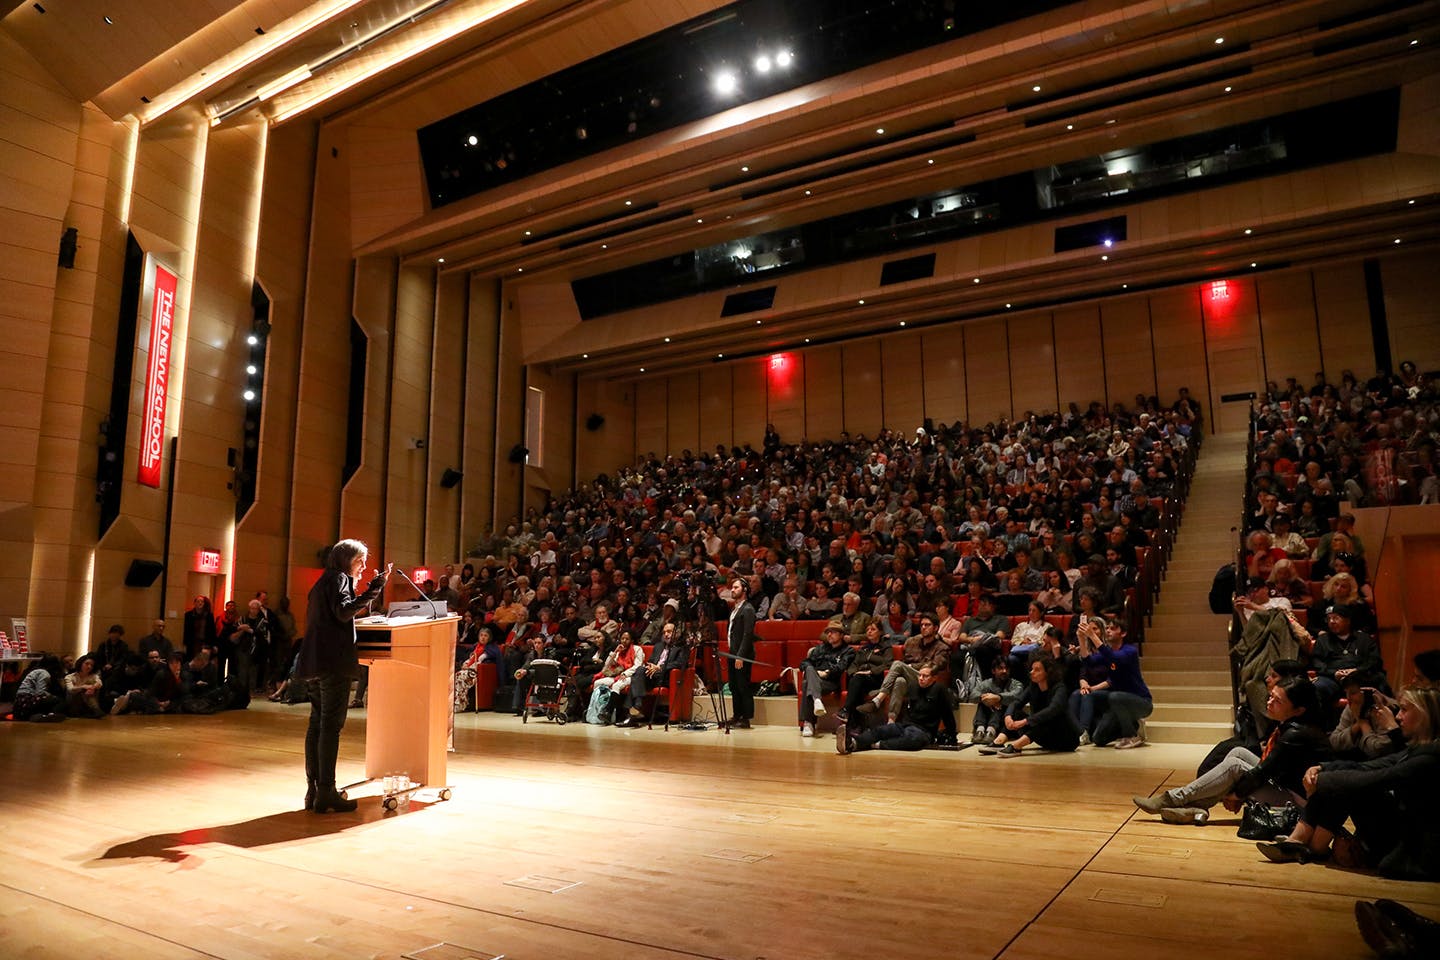 An auditorium full of people listens to a speaker.